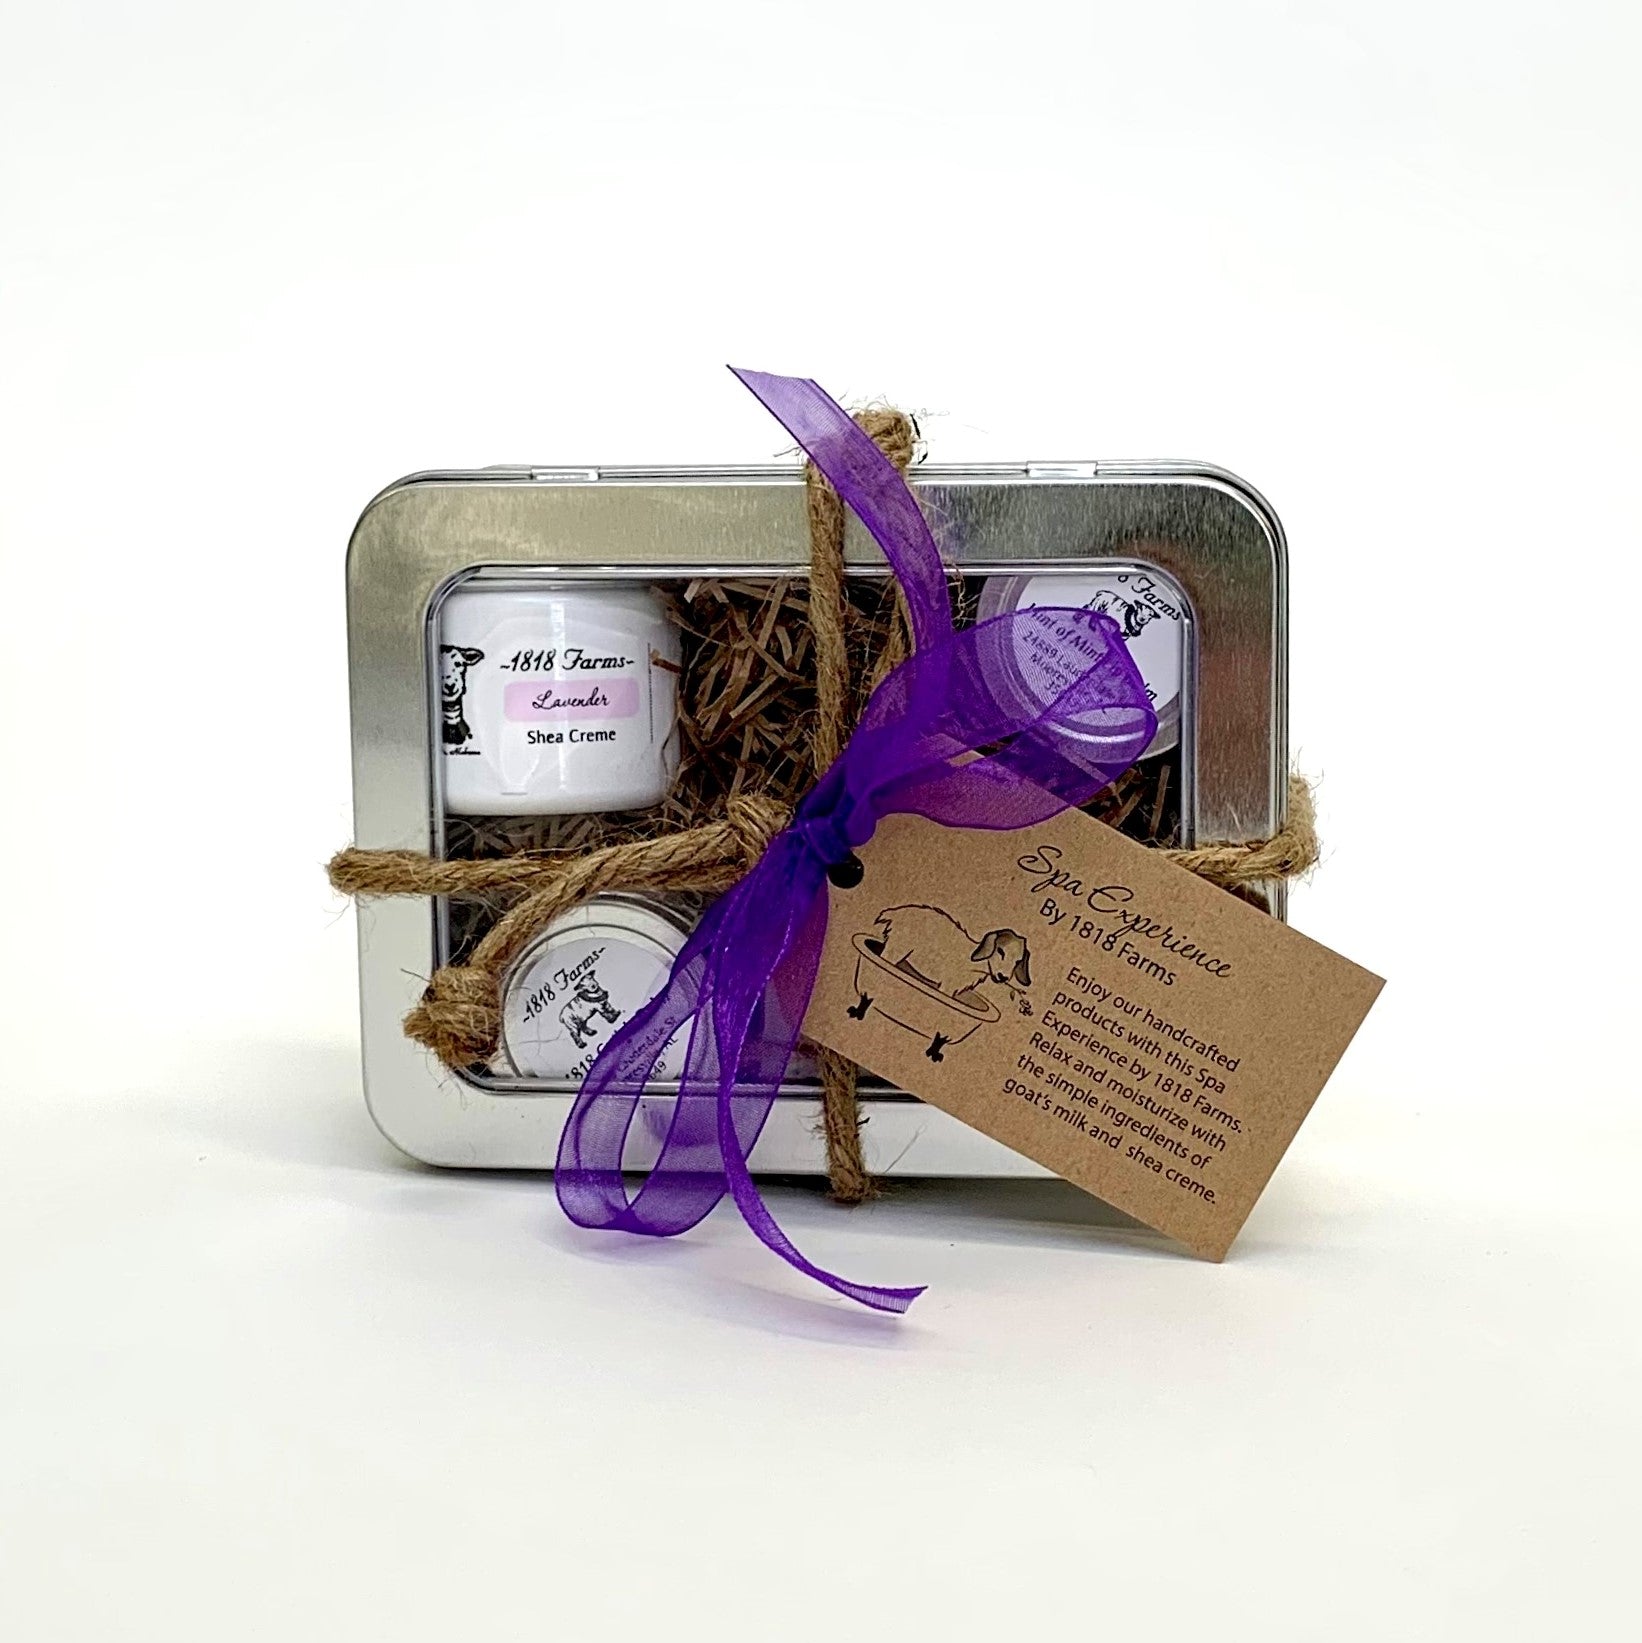 Spa Experience by 1818 Farms - Lavender Gift Basket 1818 Farms   